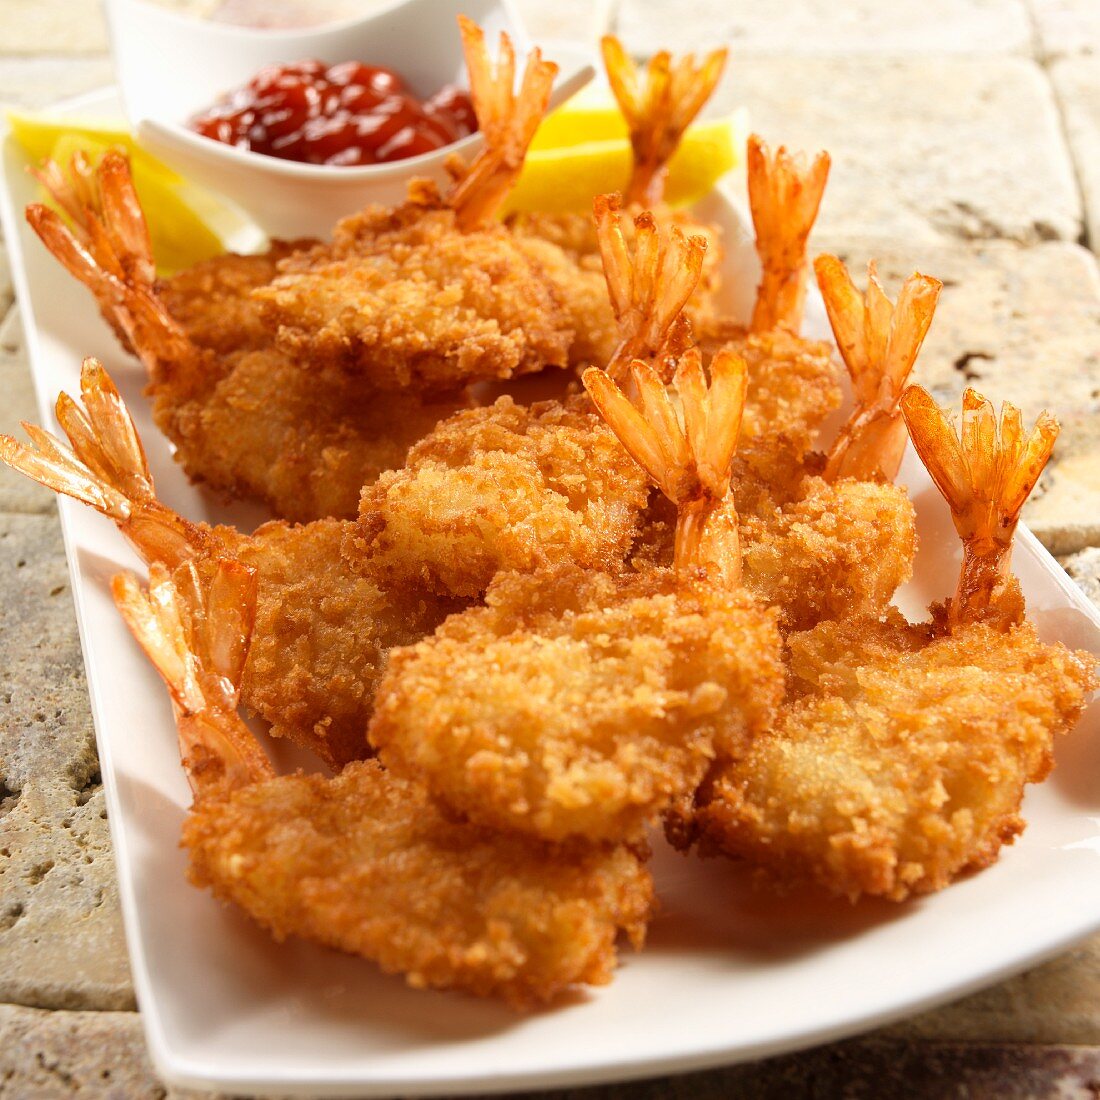 Breaded fried prawns with lemon slices and a seafood sauce